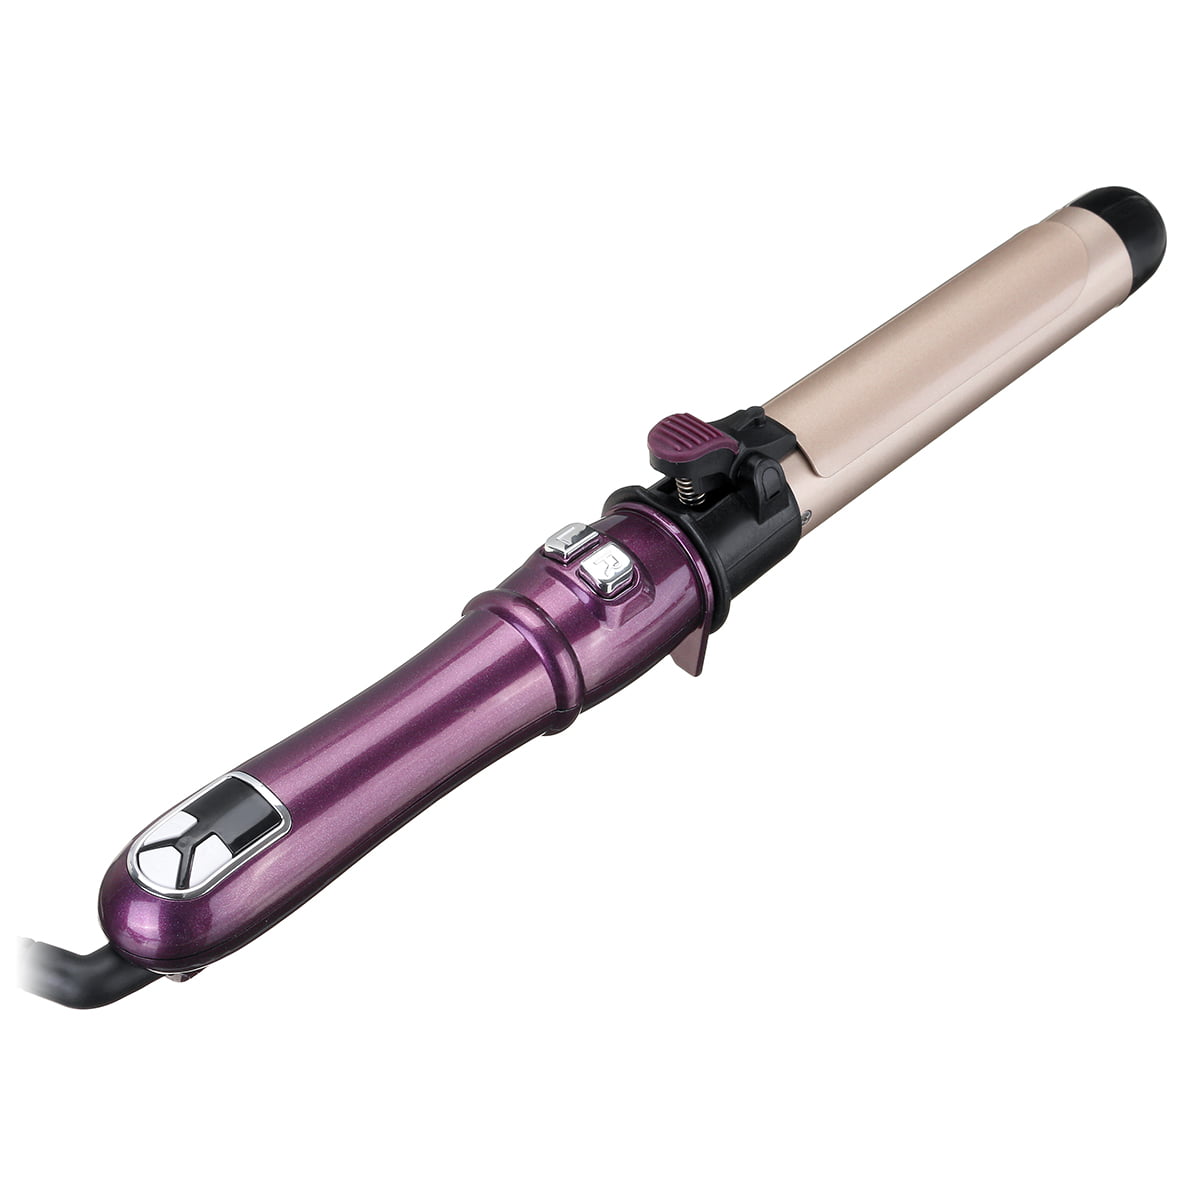 Electric Auto Hair Curling Iron , Ceramic Hair Curler Styling Wand , 360° Rotating Hair Rollers